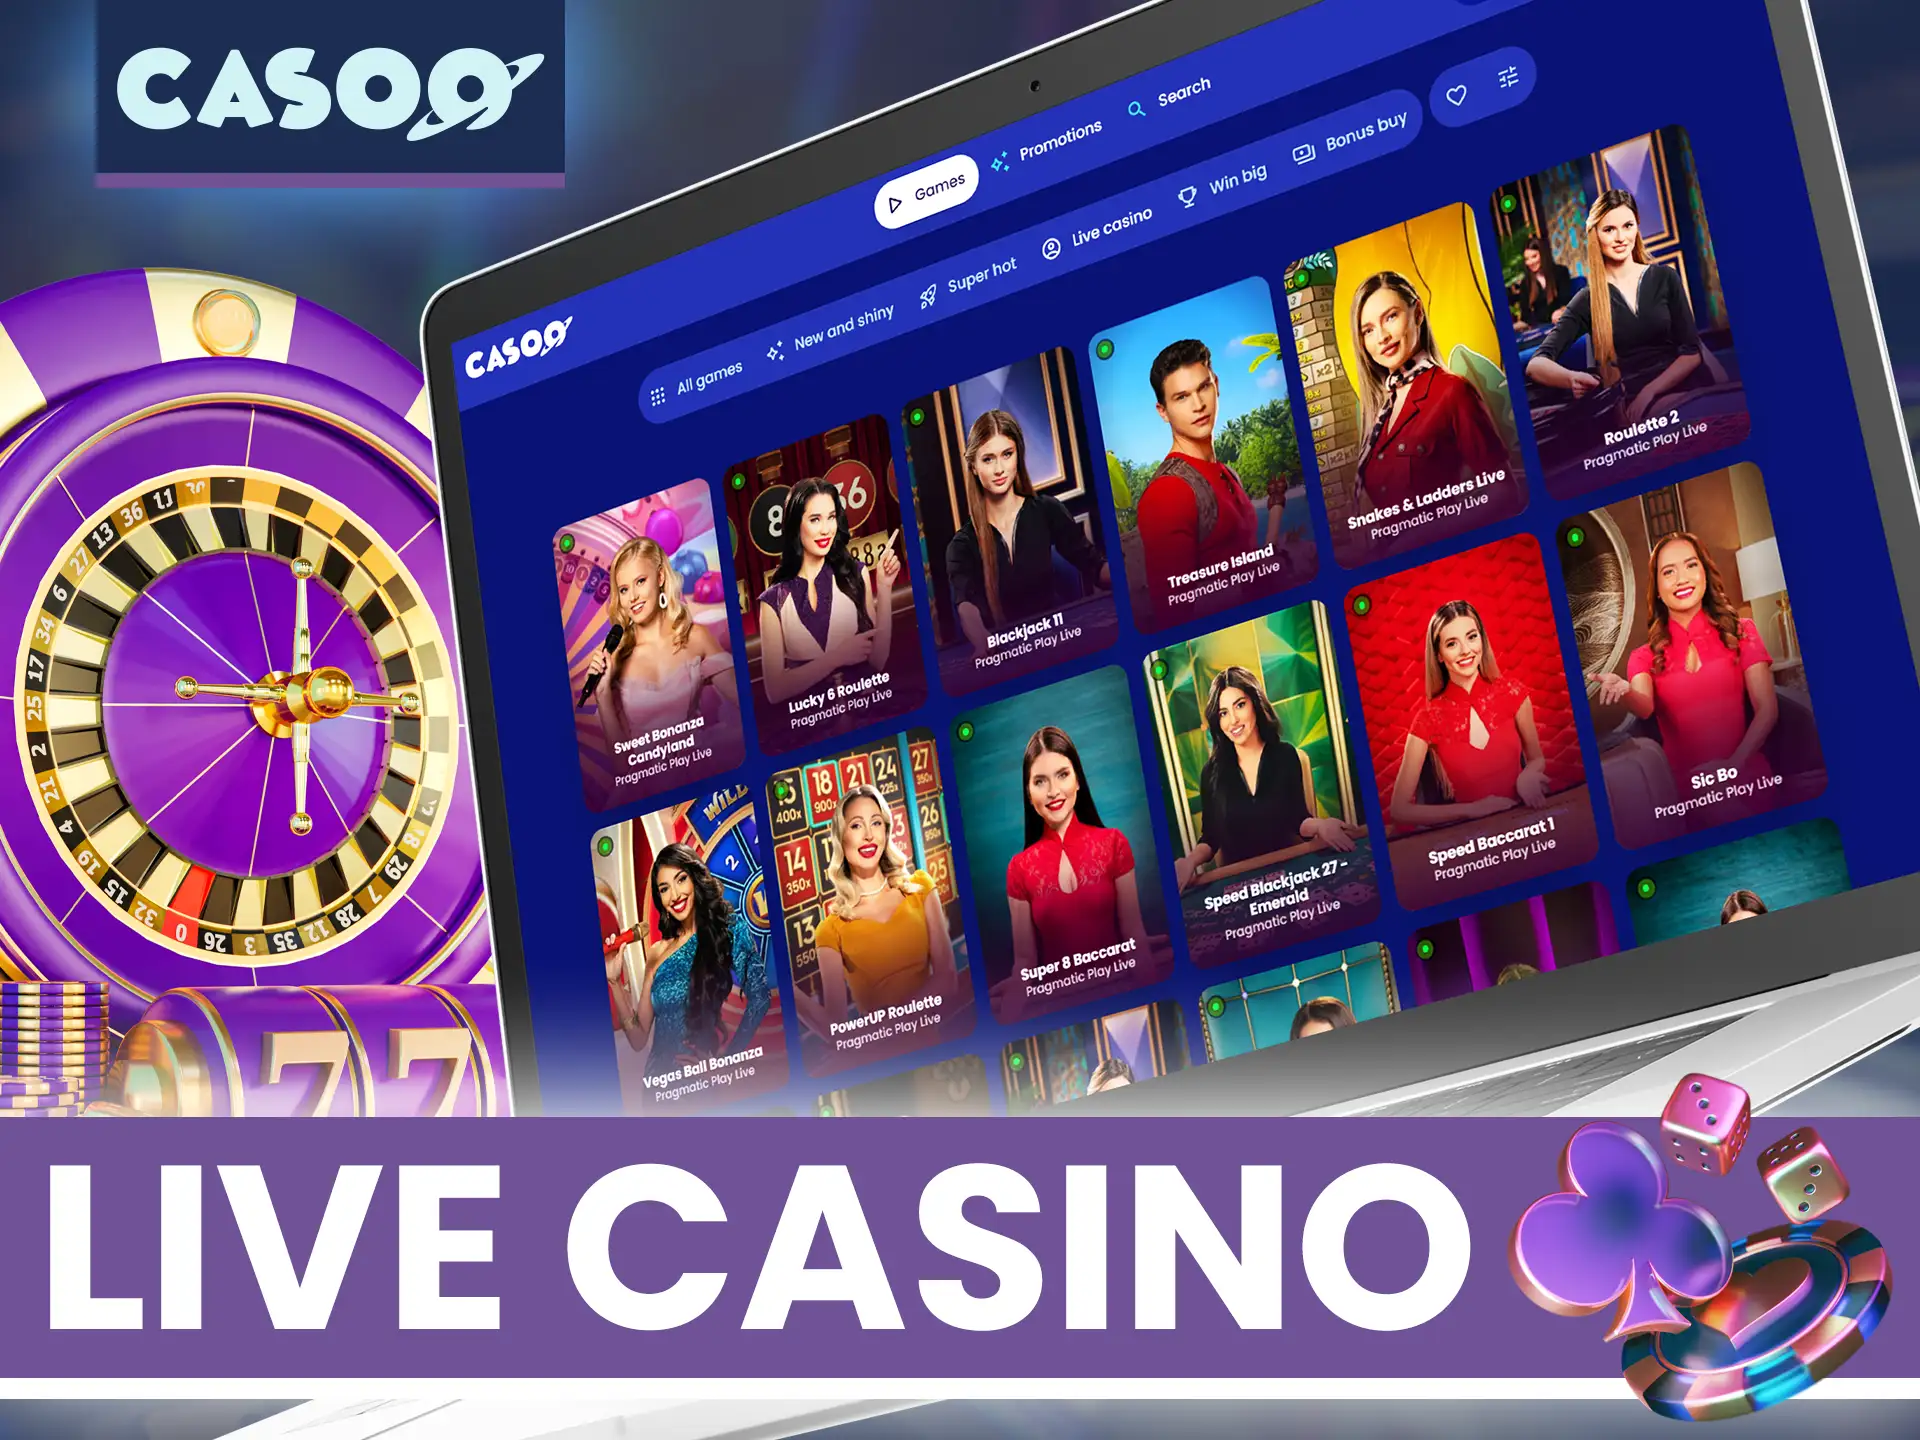 Place your bets in real time at Casoo Live Casino.